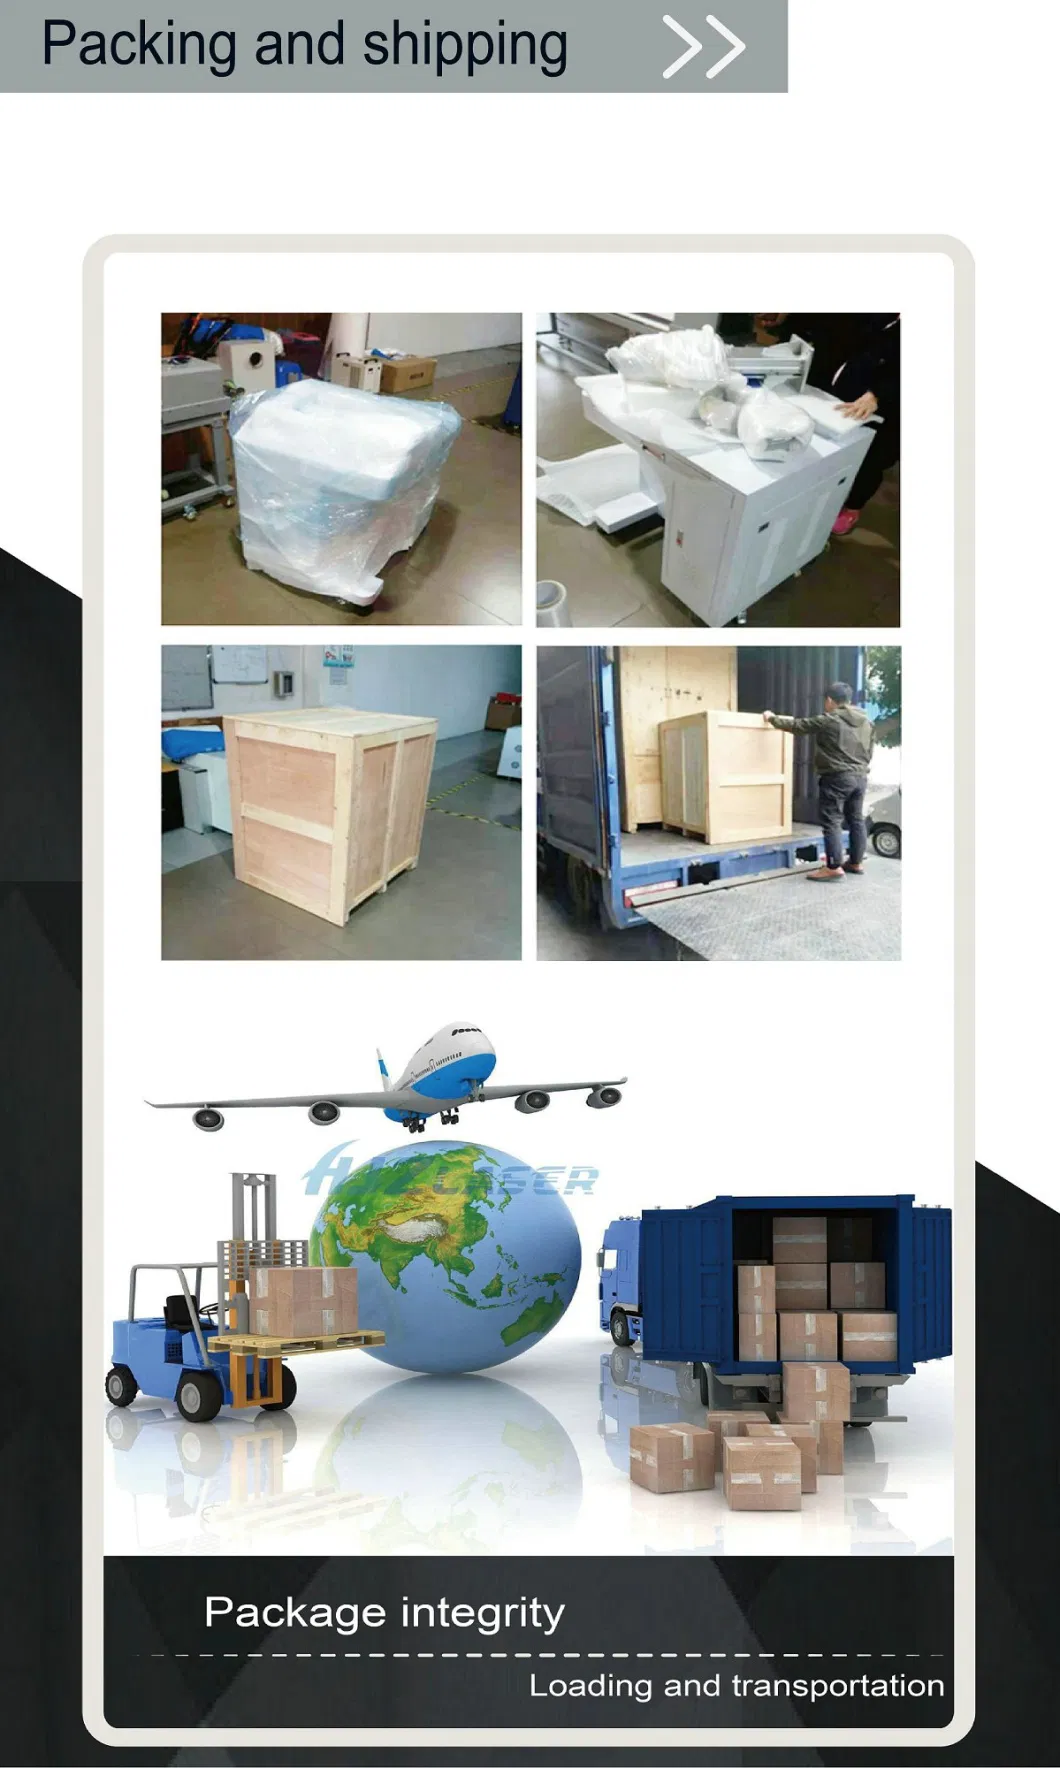 Big Size Product and Running Automatic CO2 Laser Marking Machine